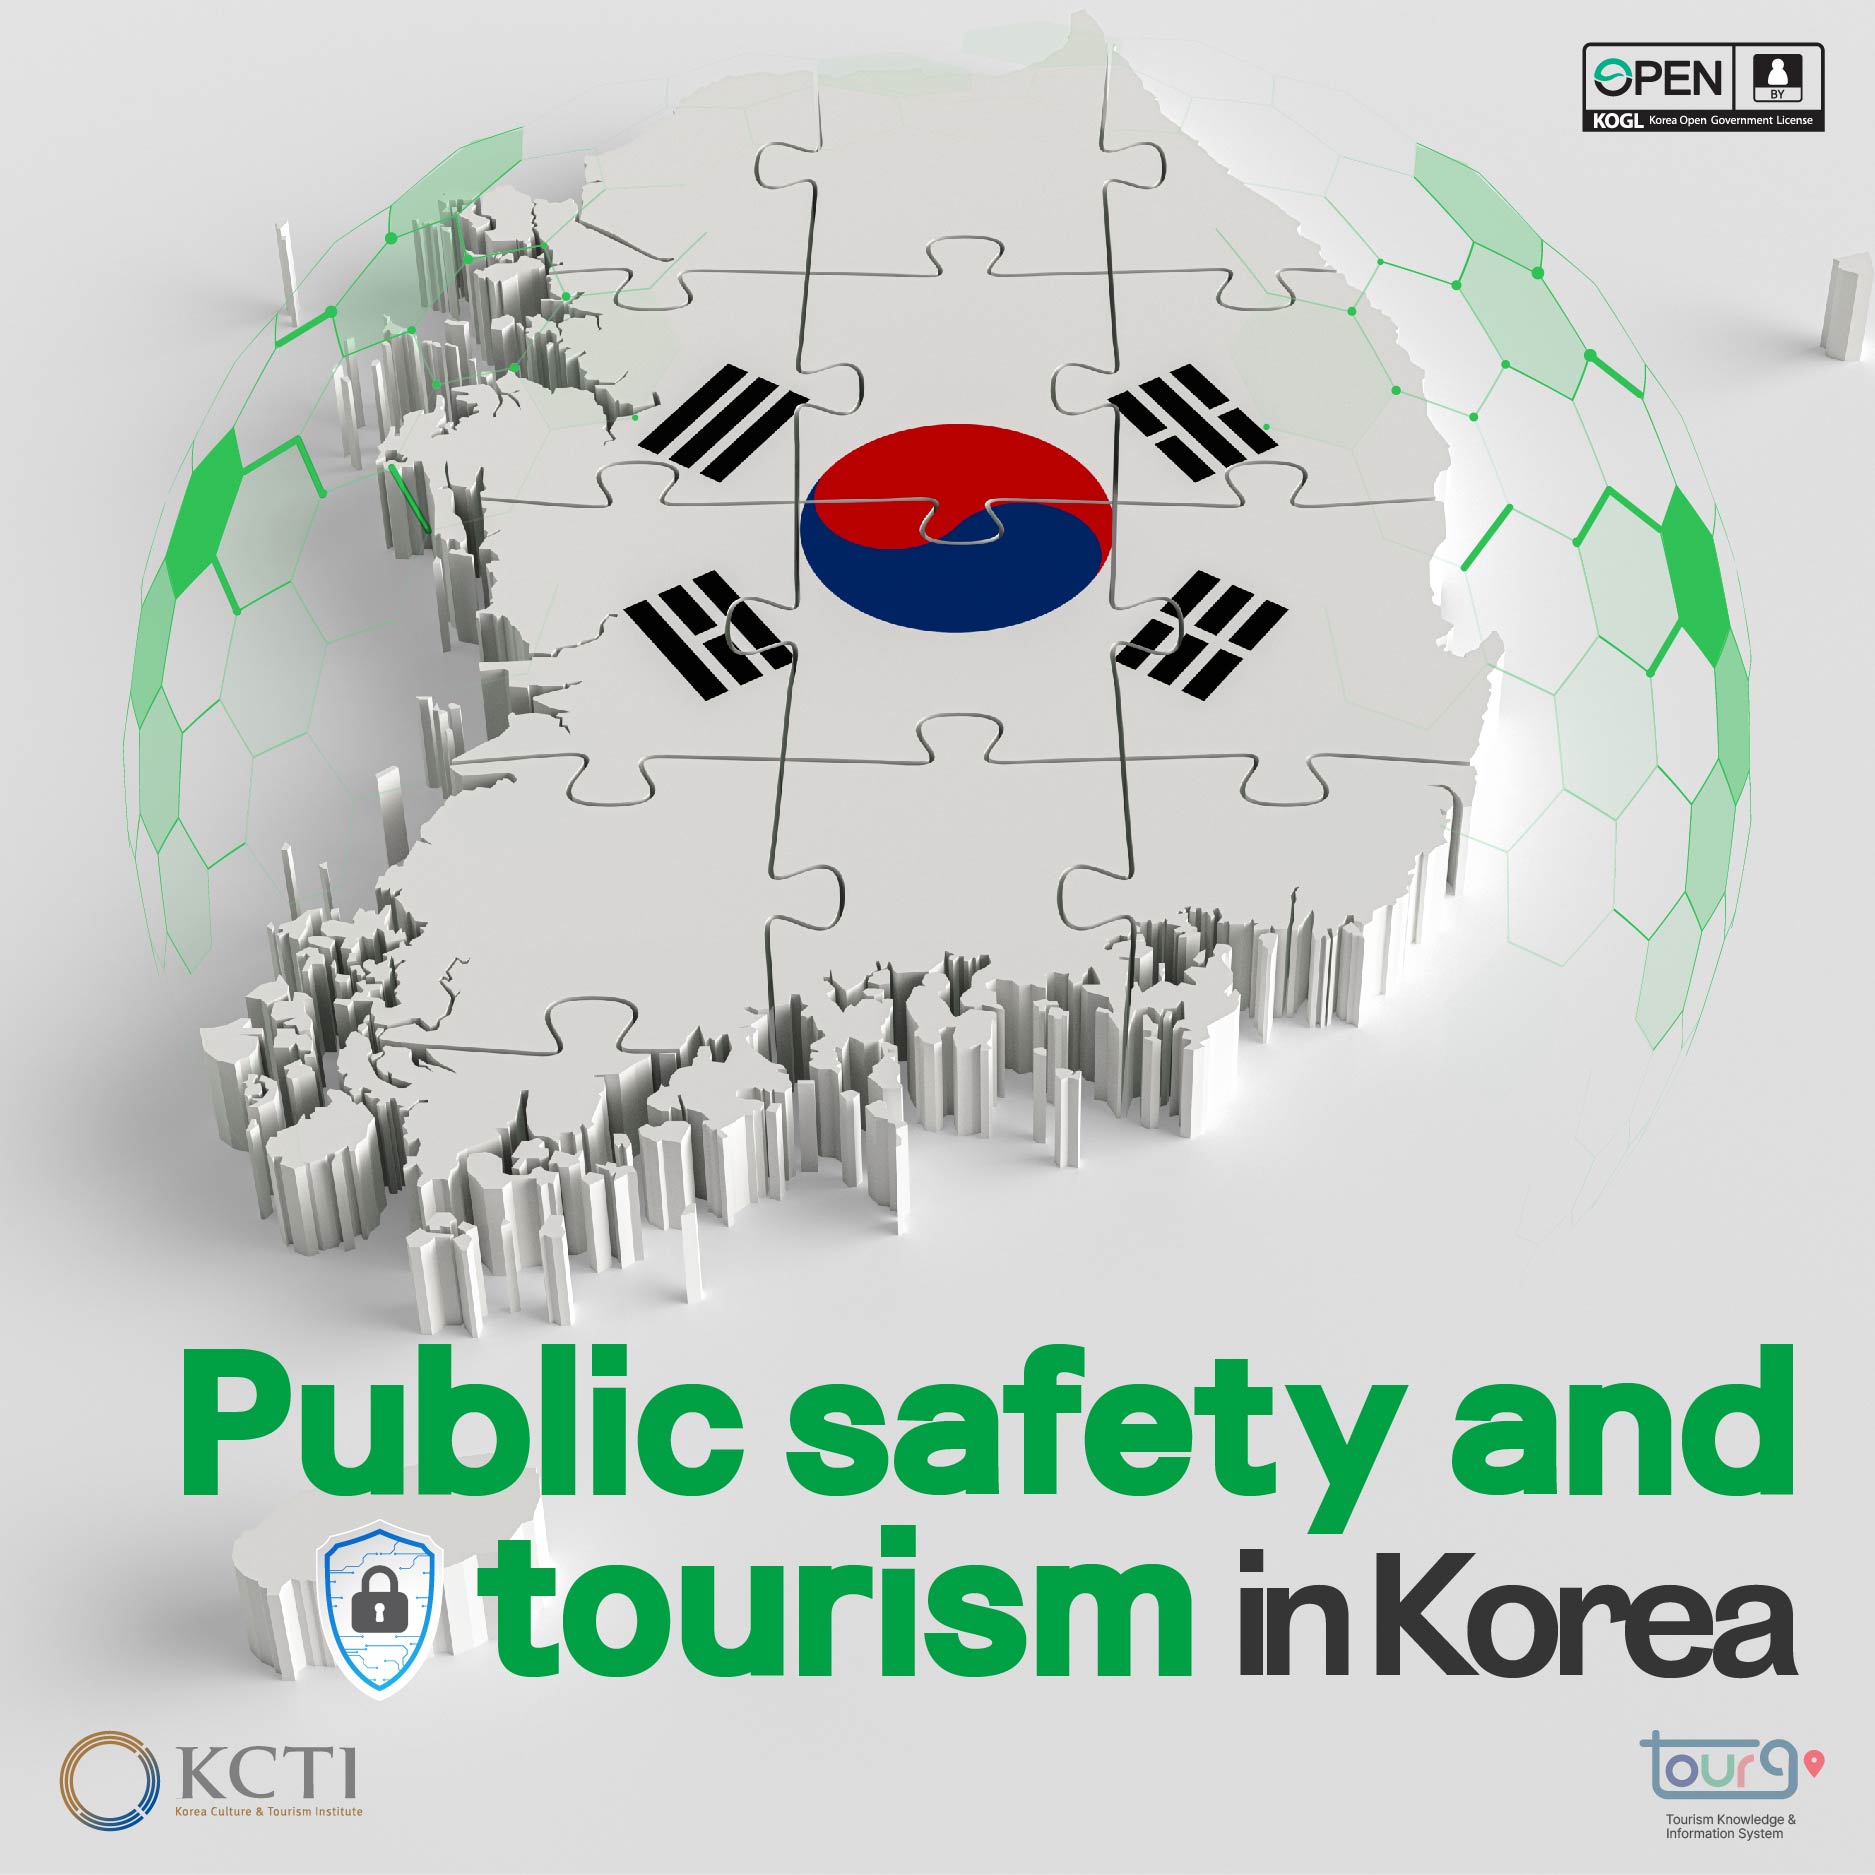 Public safety and tourism in Korea